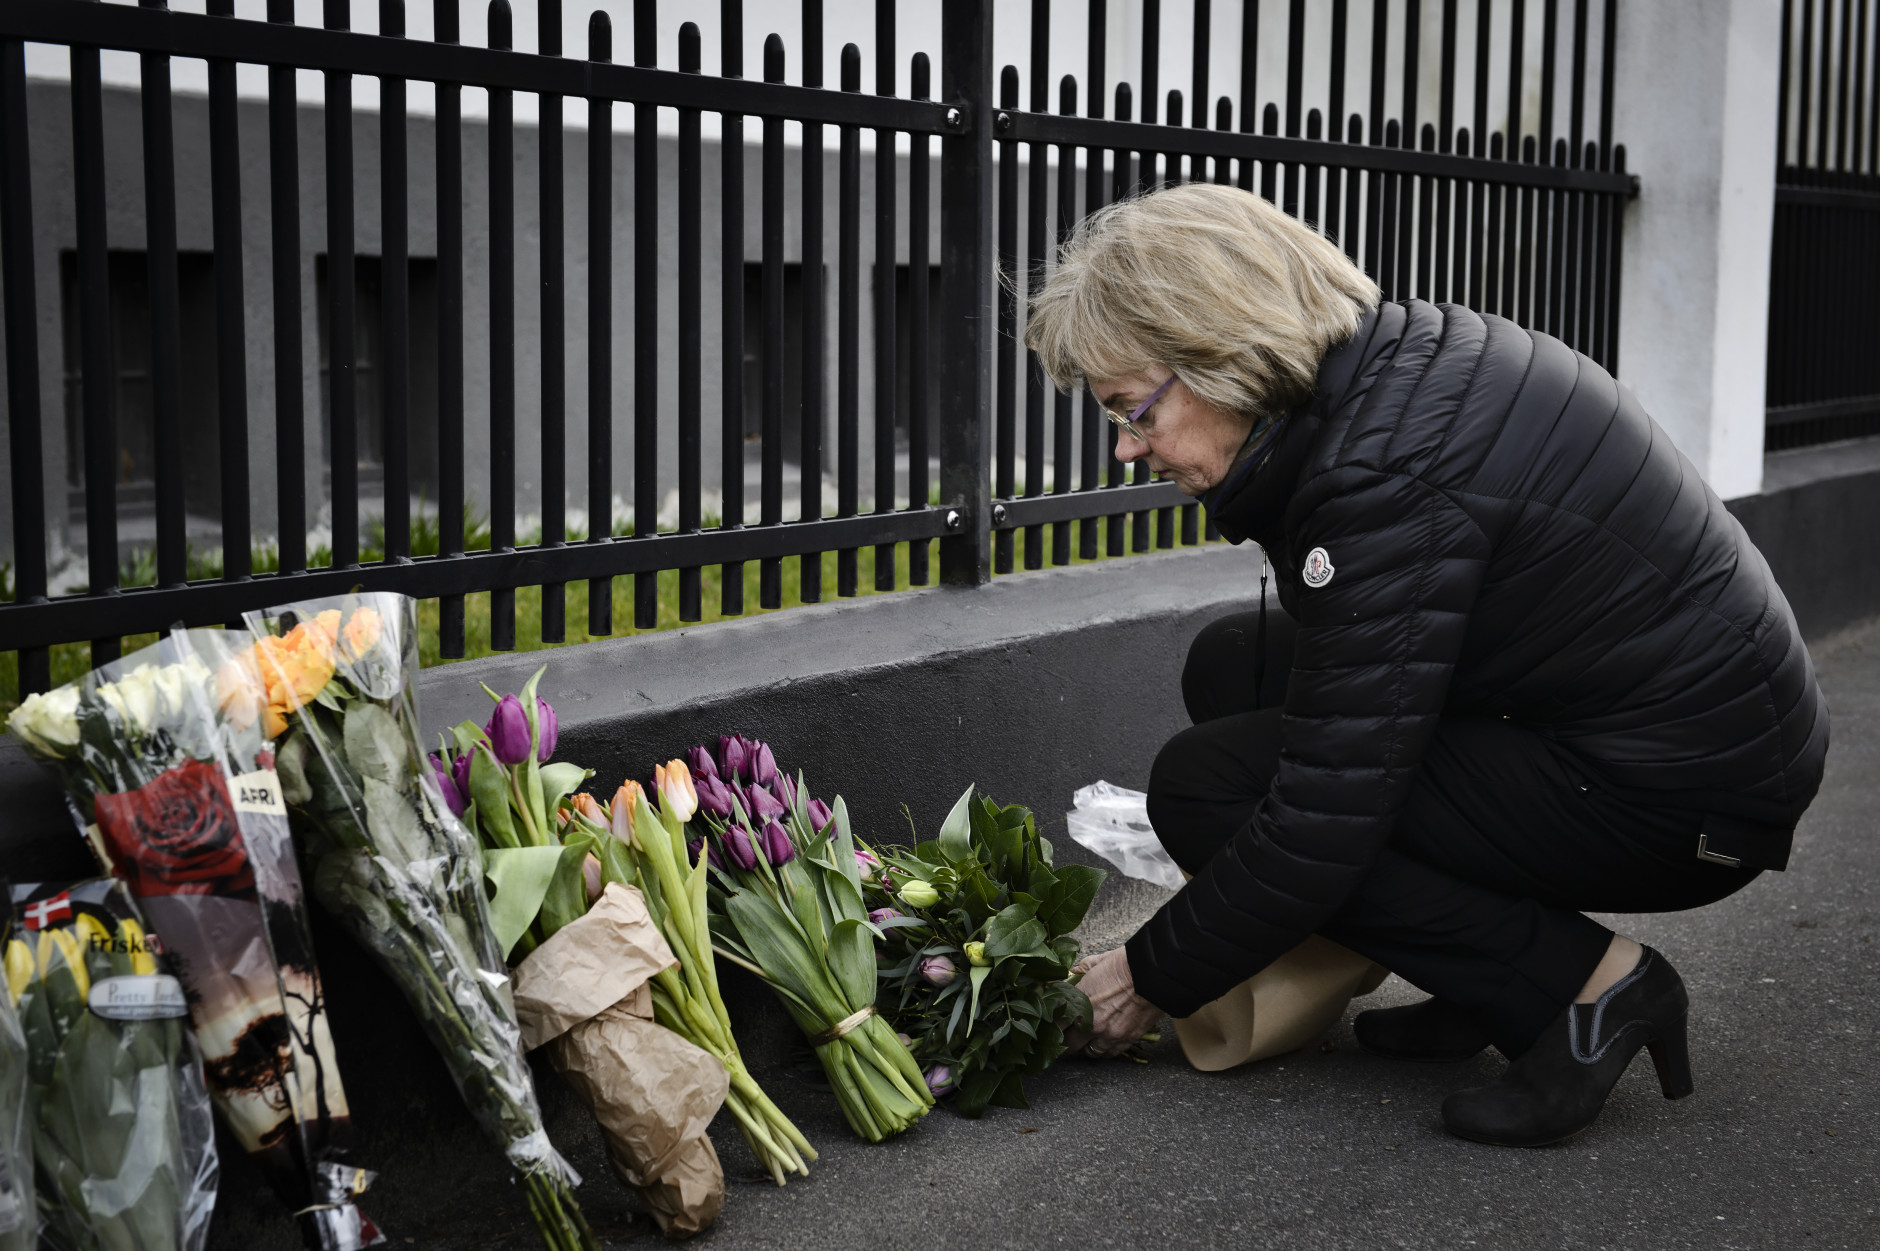 Chairman of the Danish Parliament, Pia Kjaersgaard, with flowers for the victims of the Brussels attacks, at the Belgium Embassy in Copenhagen Tuesday, March 22, 2016. Bombs exploded at the Brussels airport and one of the city's metro stations Tuesday, killing and wounding dozens of people, as a European capital was again locked down amid heightened security threats. The Islamic State group claimed responsibility for the attacks. (Philip Davali/POLFOTO via AP)  DENMARK OUT